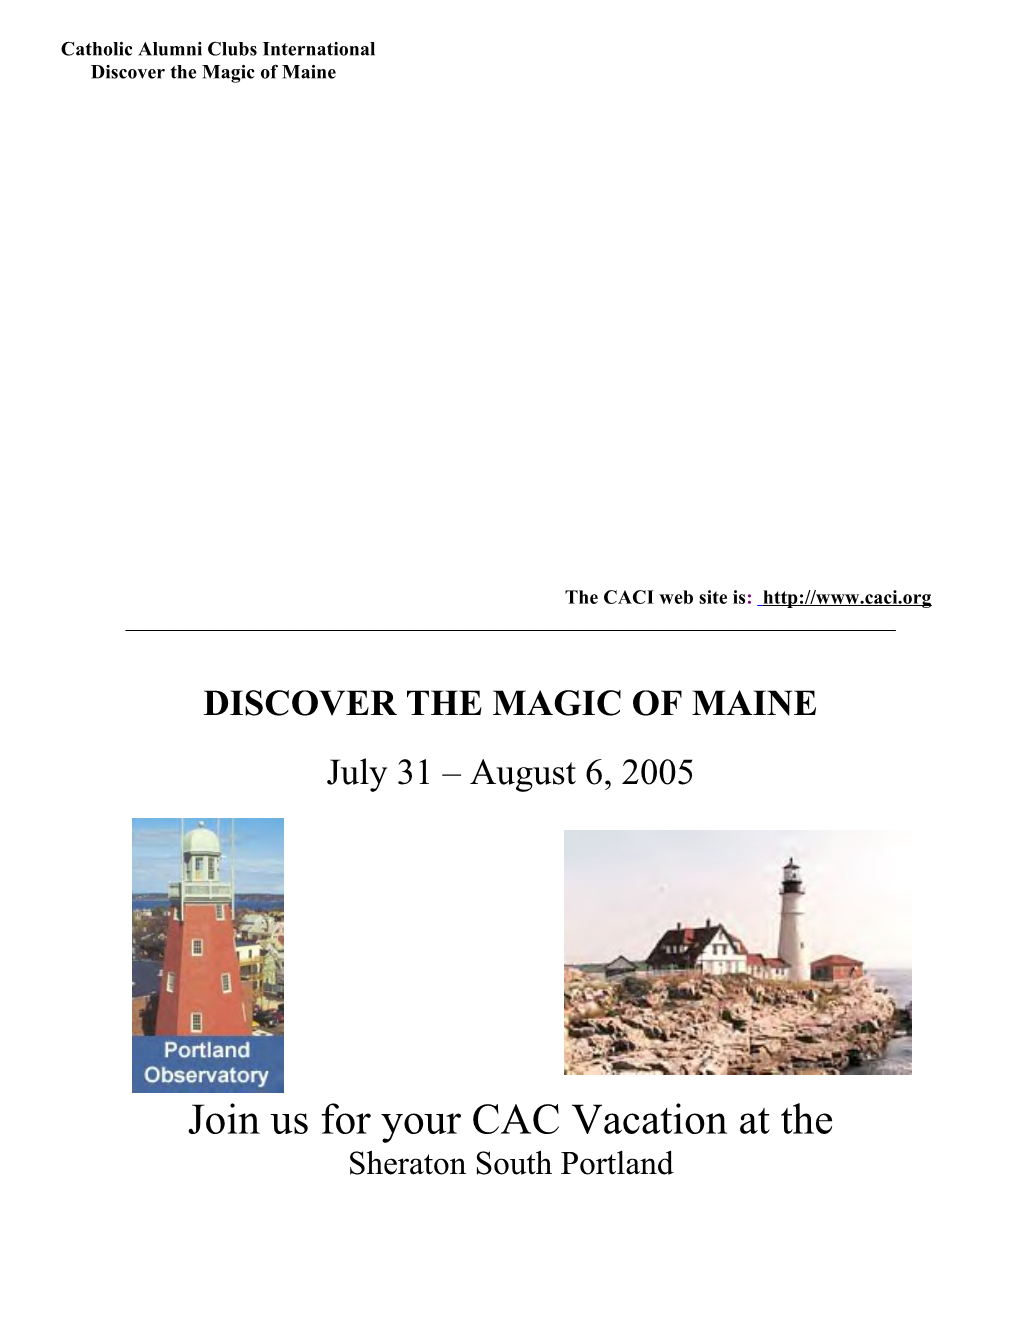 Discover the Magic of Maine